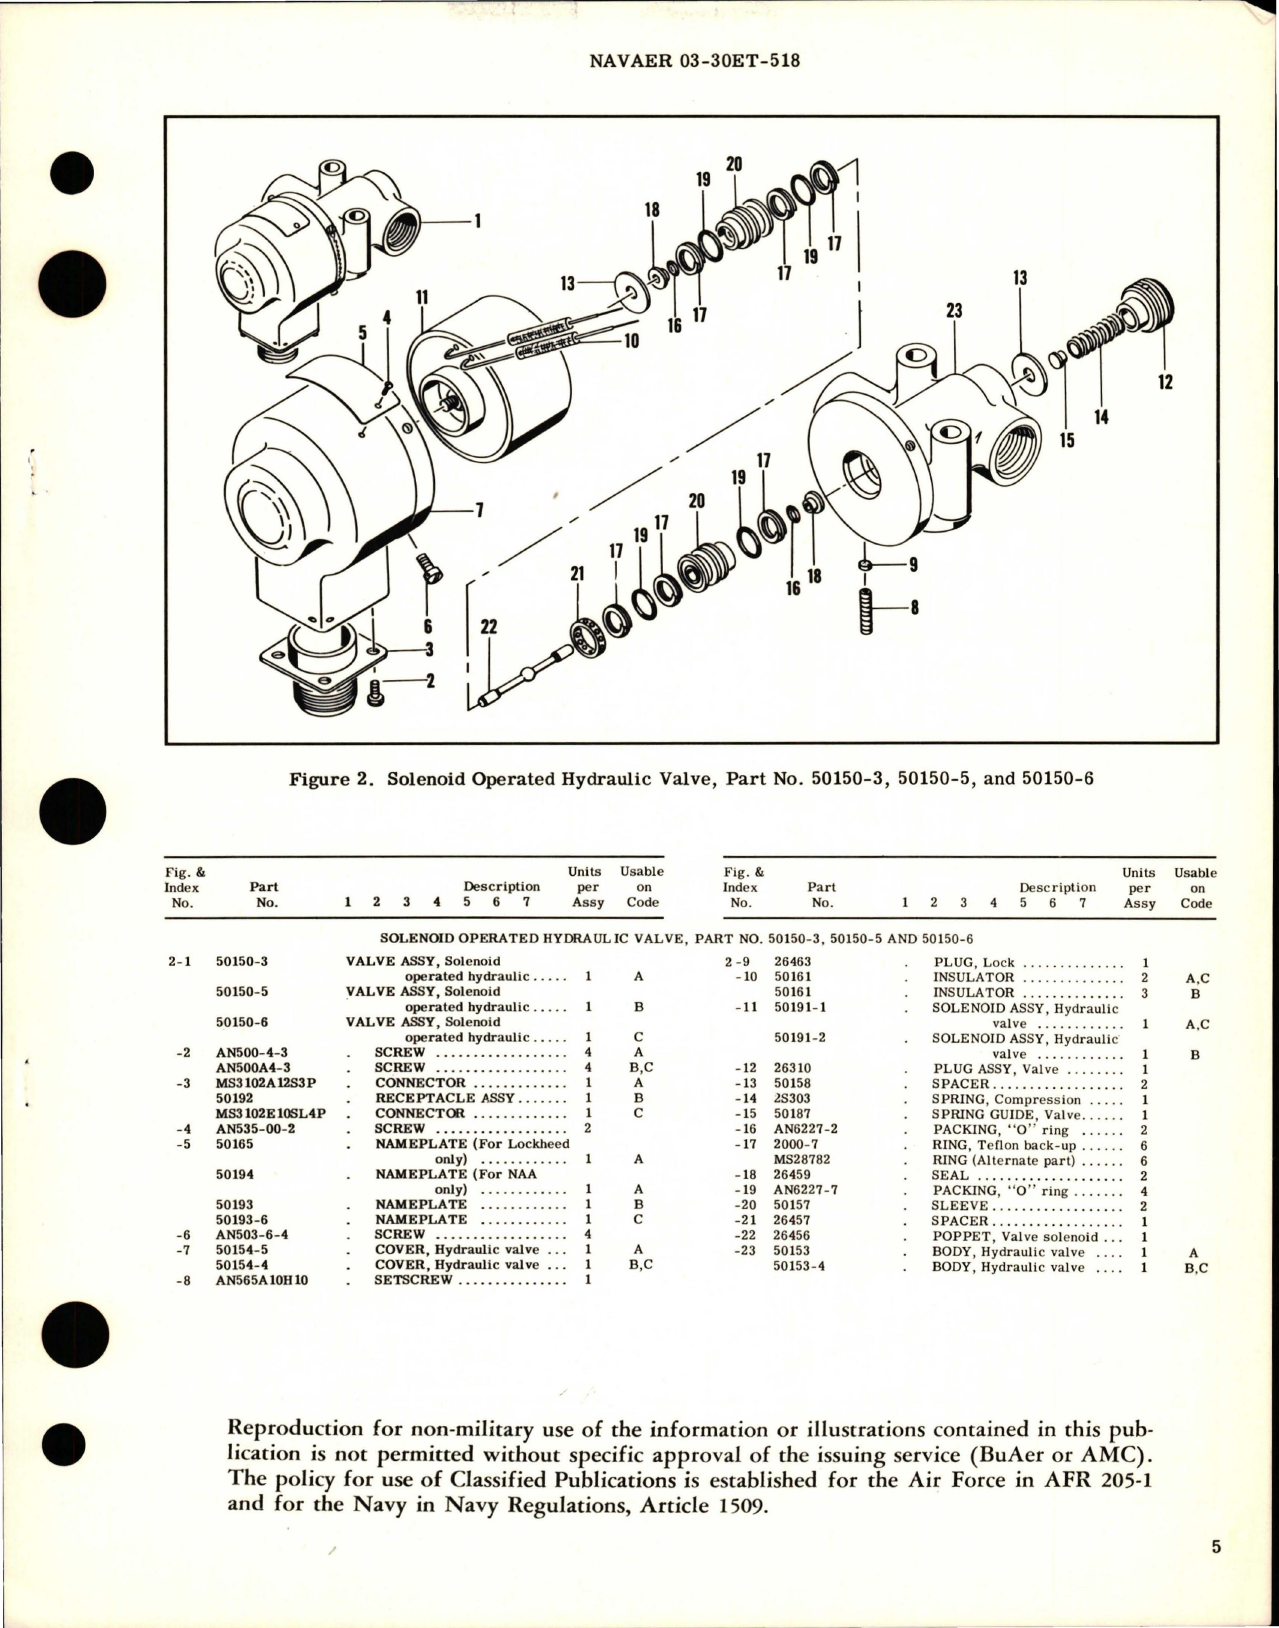 Sample page 5 from AirCorps Library document: Overhaul Instructions with Parts Breakdown for Solenoid Operated Hydraulic Valve - Parts 50150-3, 50150-5, and 50150-6 